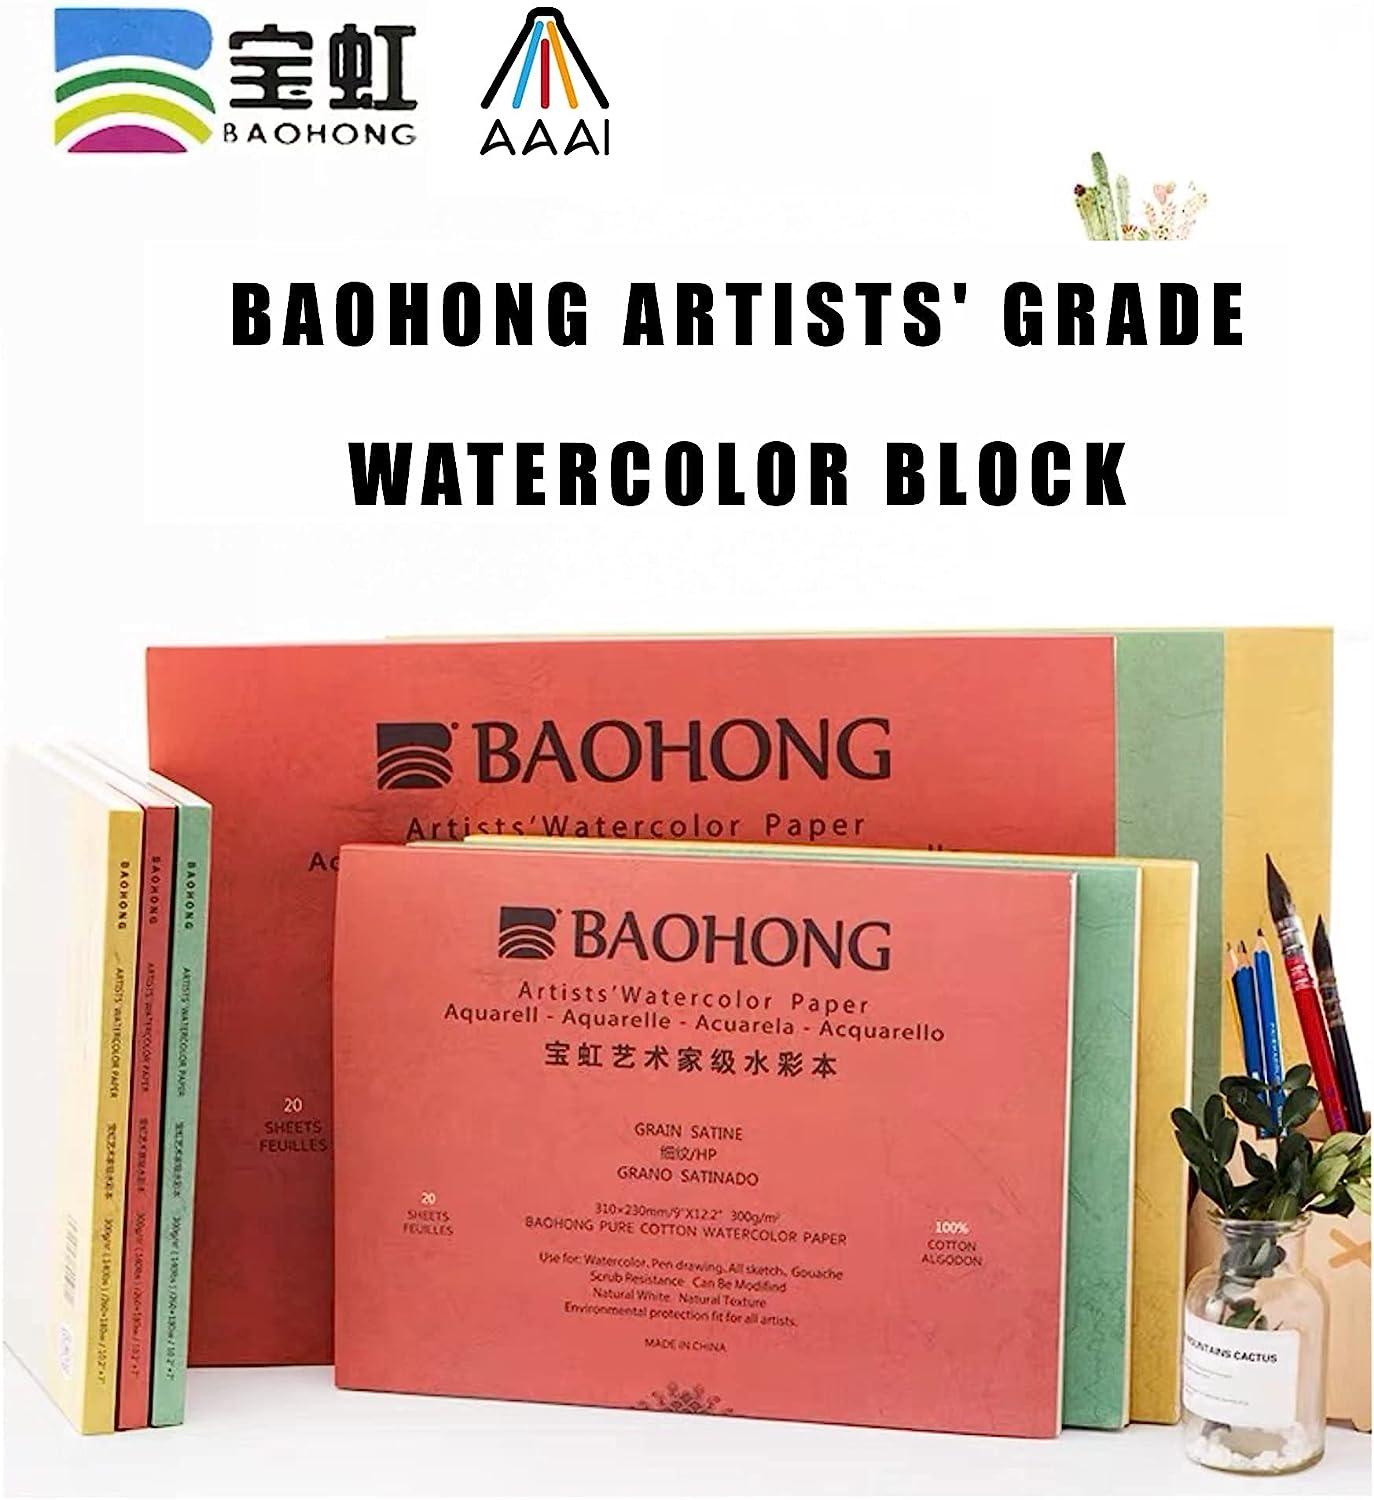  BAOHONG Artists' Watercolor Paper Block, Textured 4.9x7, 20  Sheets, 100% Cotton, Acid-Free, 140LB/300GSM, Watercolor Art Supplies for  Wet, Dry, and Mixed Media Painting